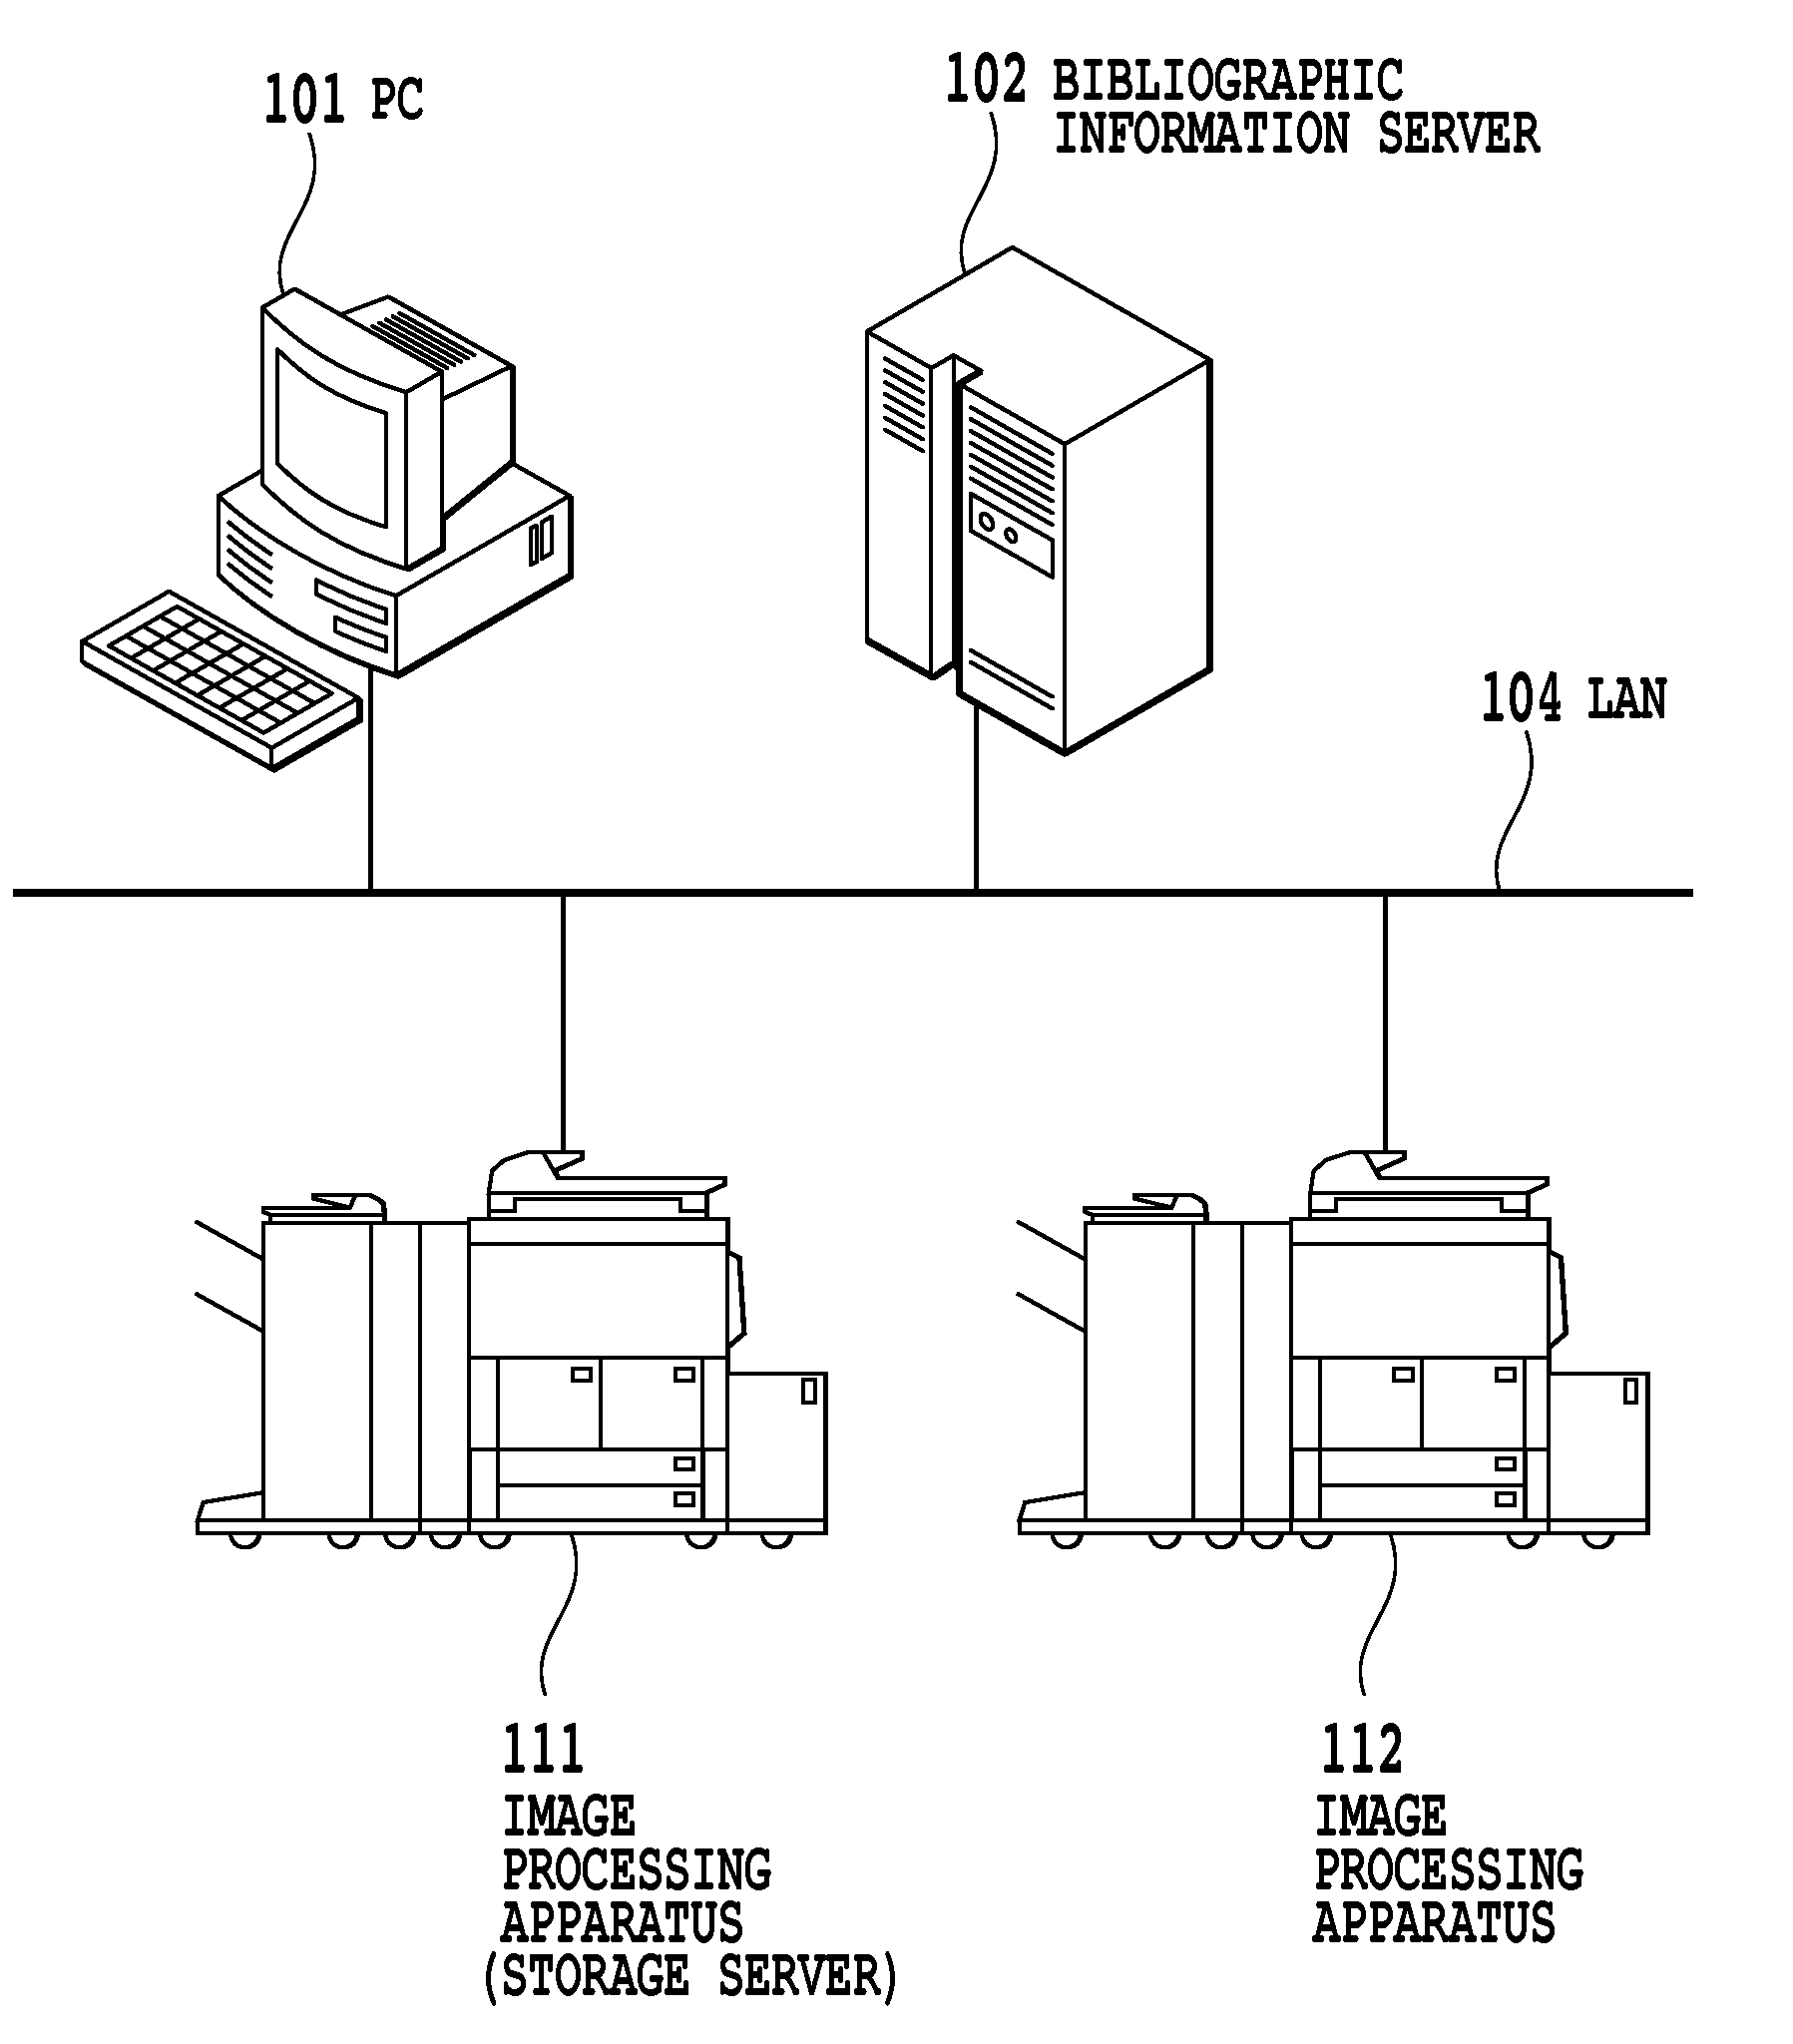 Image processing apparatus in pull printing system, and method of controlling image processing apparatus